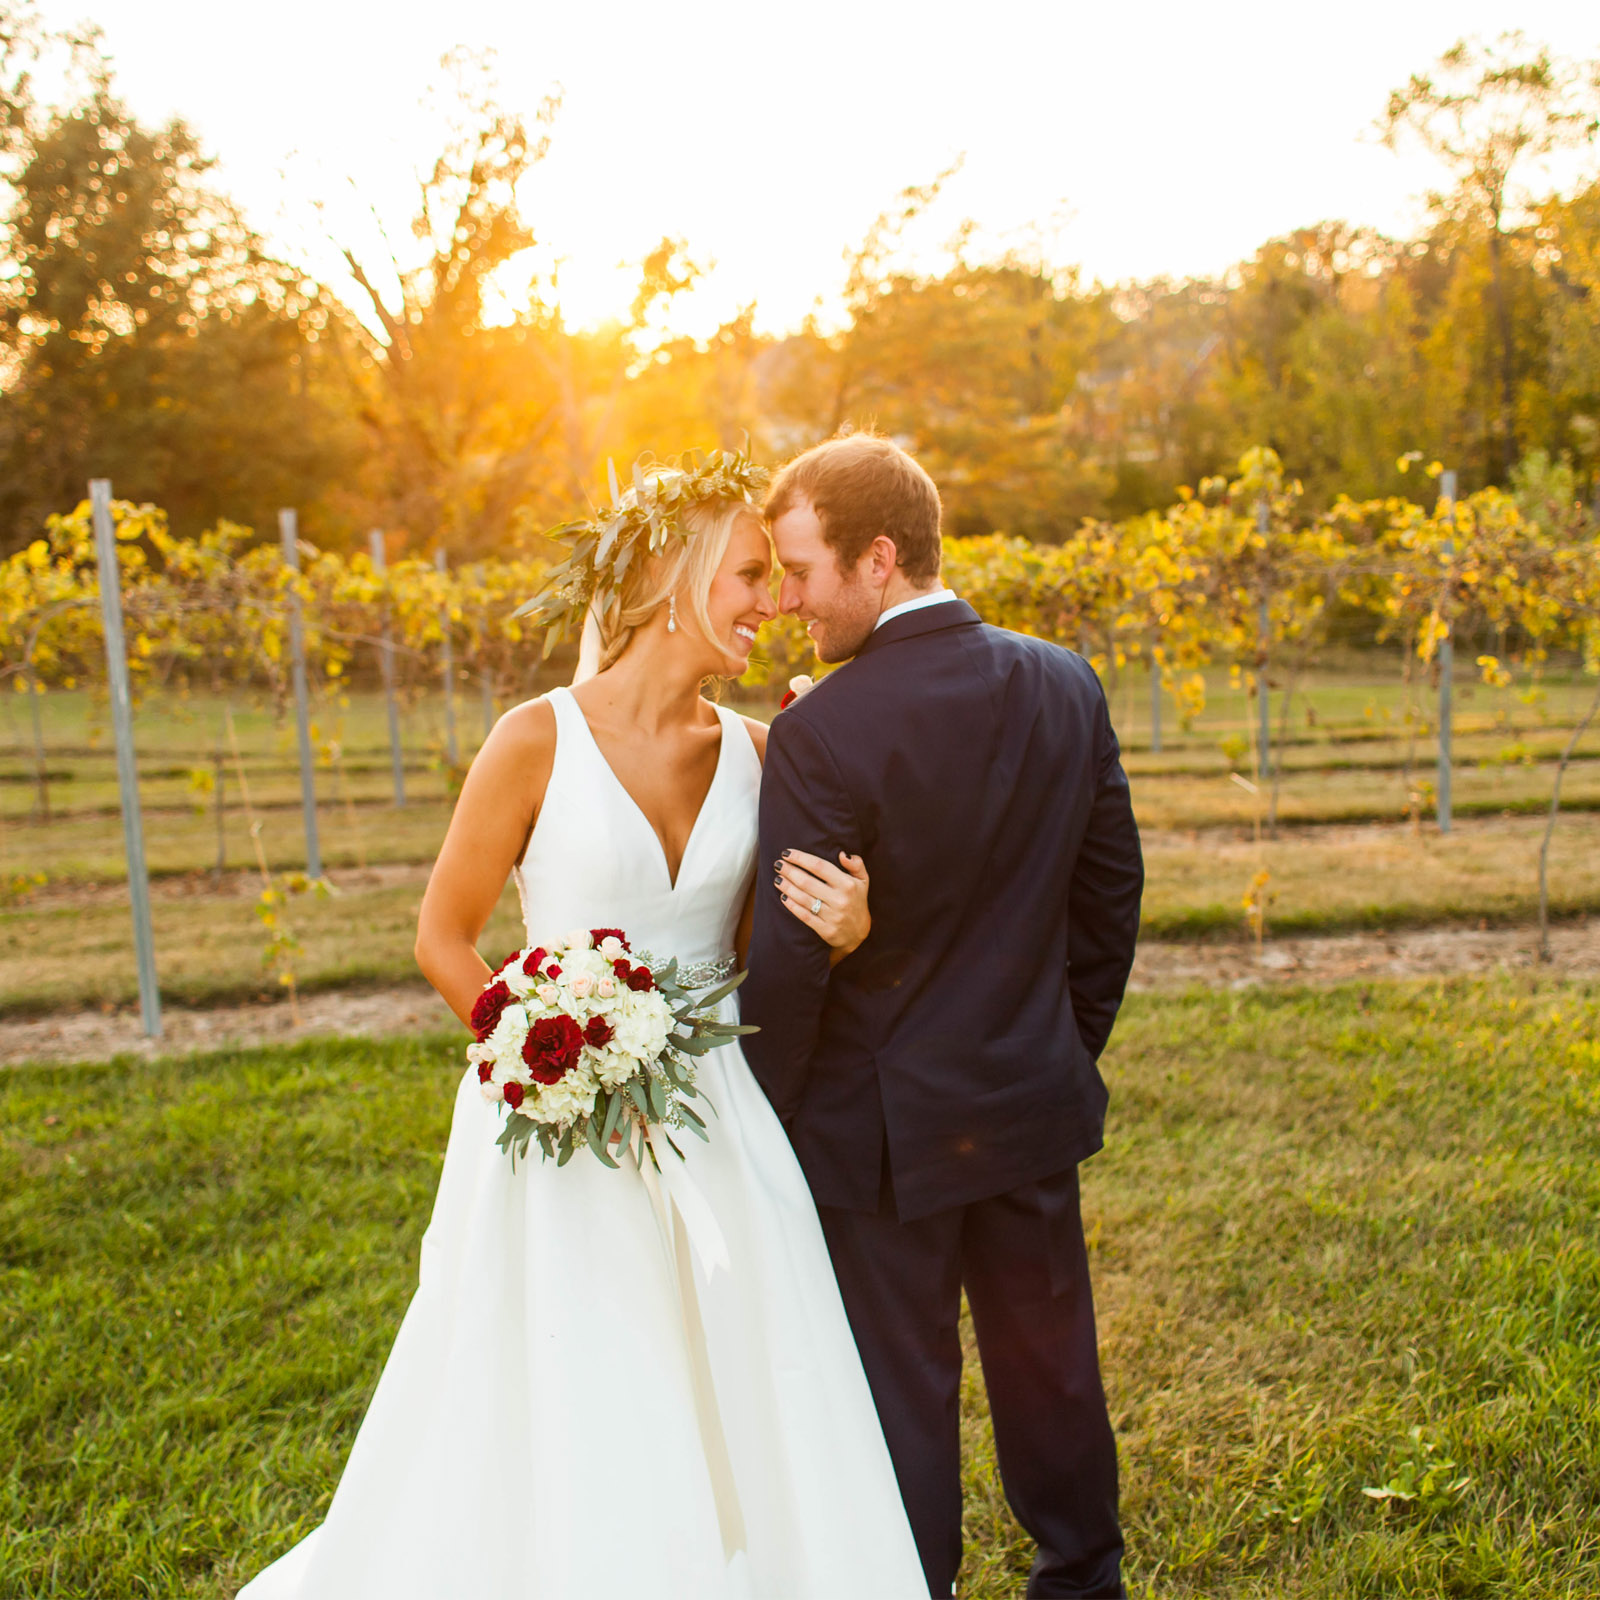 Rustic Winery Wedding Photographer - St. Louis, Southern IL